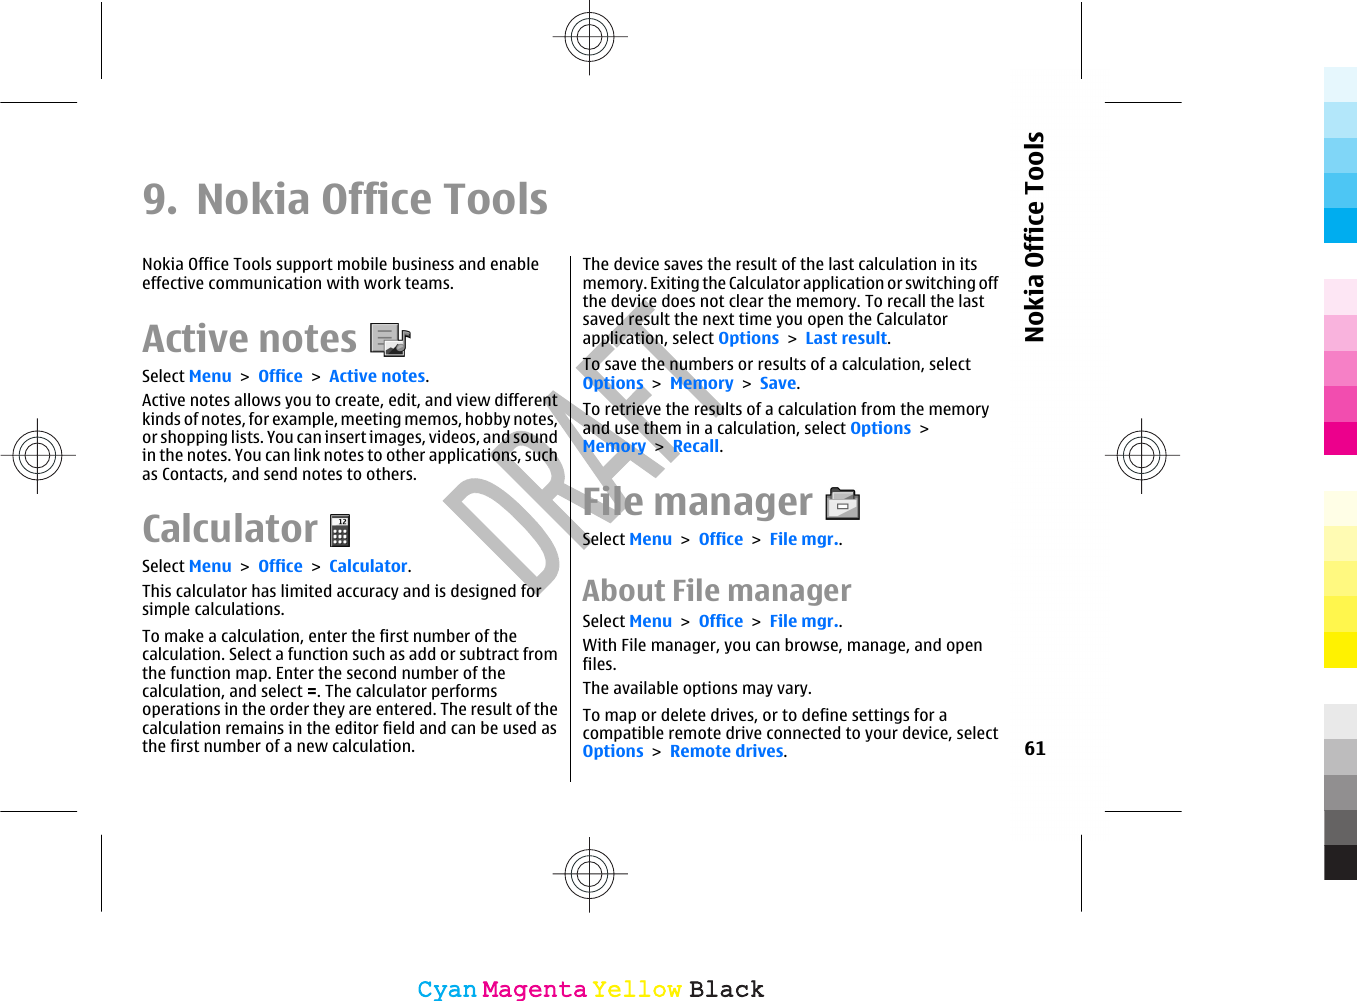 9. Nokia Office ToolsNokia Office Tools support mobile business and enableeffective communication with work teams.Active notesSelect Menu &gt; Office &gt; Active notes.Active notes allows you to create, edit, and view differentkinds of notes, for example, meeting memos, hobby notes,or shopping lists. You can insert images, videos, and soundin the notes. You can link notes to other applications, suchas Contacts, and send notes to others.CalculatorSelect Menu &gt; Office &gt; Calculator.This calculator has limited accuracy and is designed forsimple calculations.To make a calculation, enter the first number of thecalculation. Select a function such as add or subtract fromthe function map. Enter the second number of thecalculation, and select =. The calculator performsoperations in the order they are entered. The result of thecalculation remains in the editor field and can be used asthe first number of a new calculation.The device saves the result of the last calculation in itsmemory. Exiting the Calculator application or switching offthe device does not clear the memory. To recall the lastsaved result the next time you open the Calculatorapplication, select Options &gt; Last result.To save the numbers or results of a calculation, selectOptions &gt; Memory &gt; Save.To retrieve the results of a calculation from the memoryand use them in a calculation, select Options &gt;Memory &gt; Recall.File managerSelect Menu &gt; Office &gt; File mgr..About File managerSelect Menu &gt; Office &gt; File mgr..With File manager, you can browse, manage, and openfiles.The available options may vary.To map or delete drives, or to define settings for acompatible remote drive connected to your device, selectOptions &gt; Remote drives.61Nokia Office ToolsCyanCyanMagentaMagentaYellowYellowBlackBlack